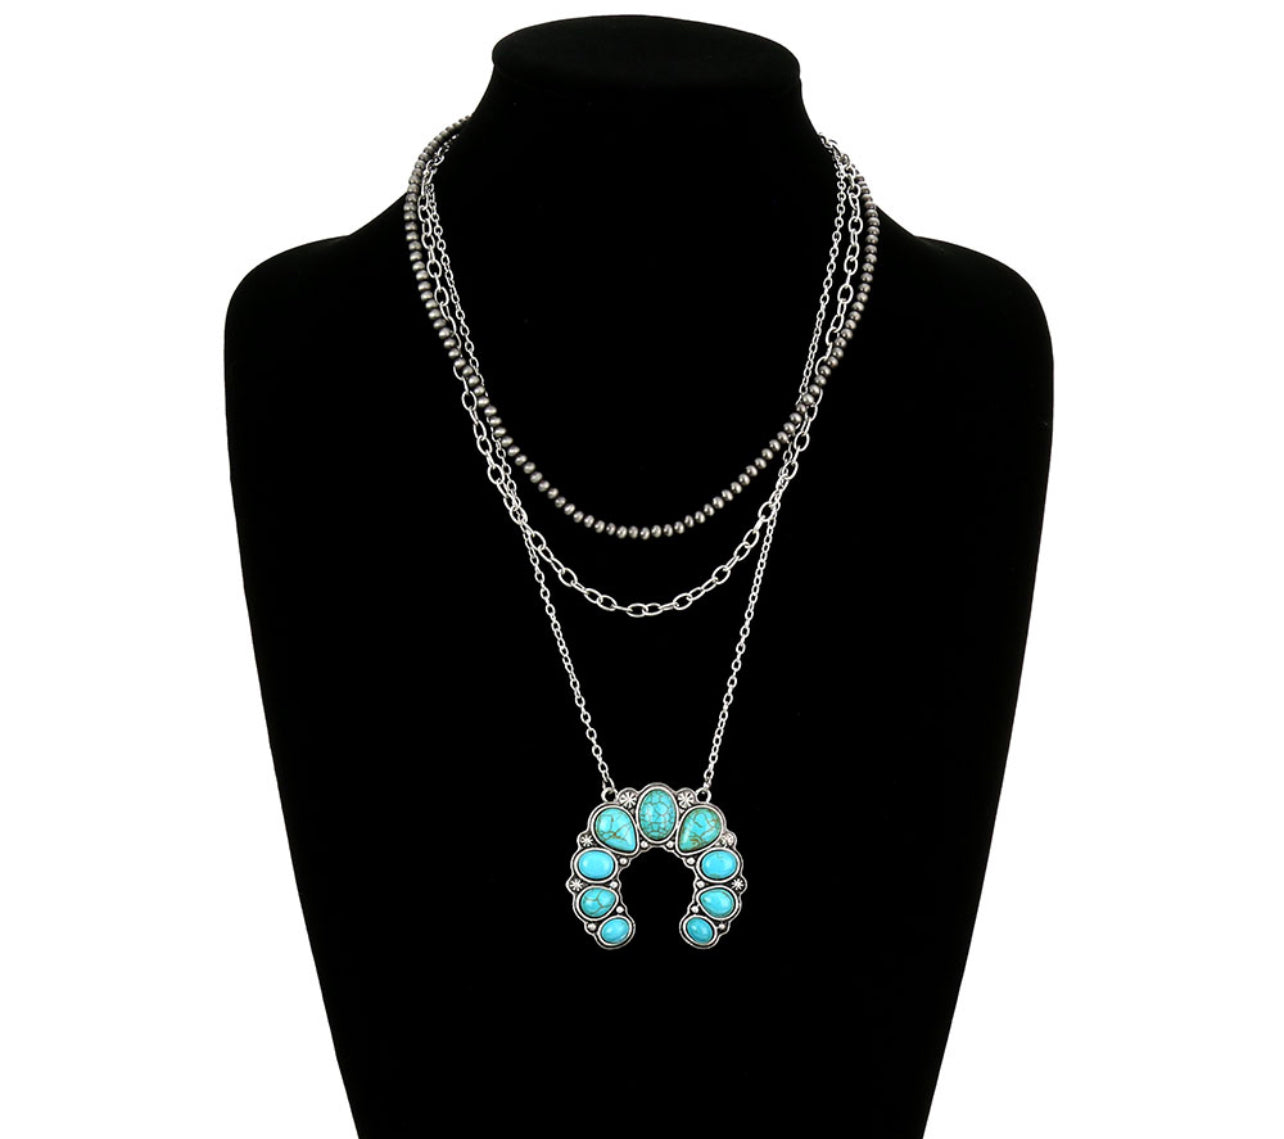 The Layla Necklace Turquoise